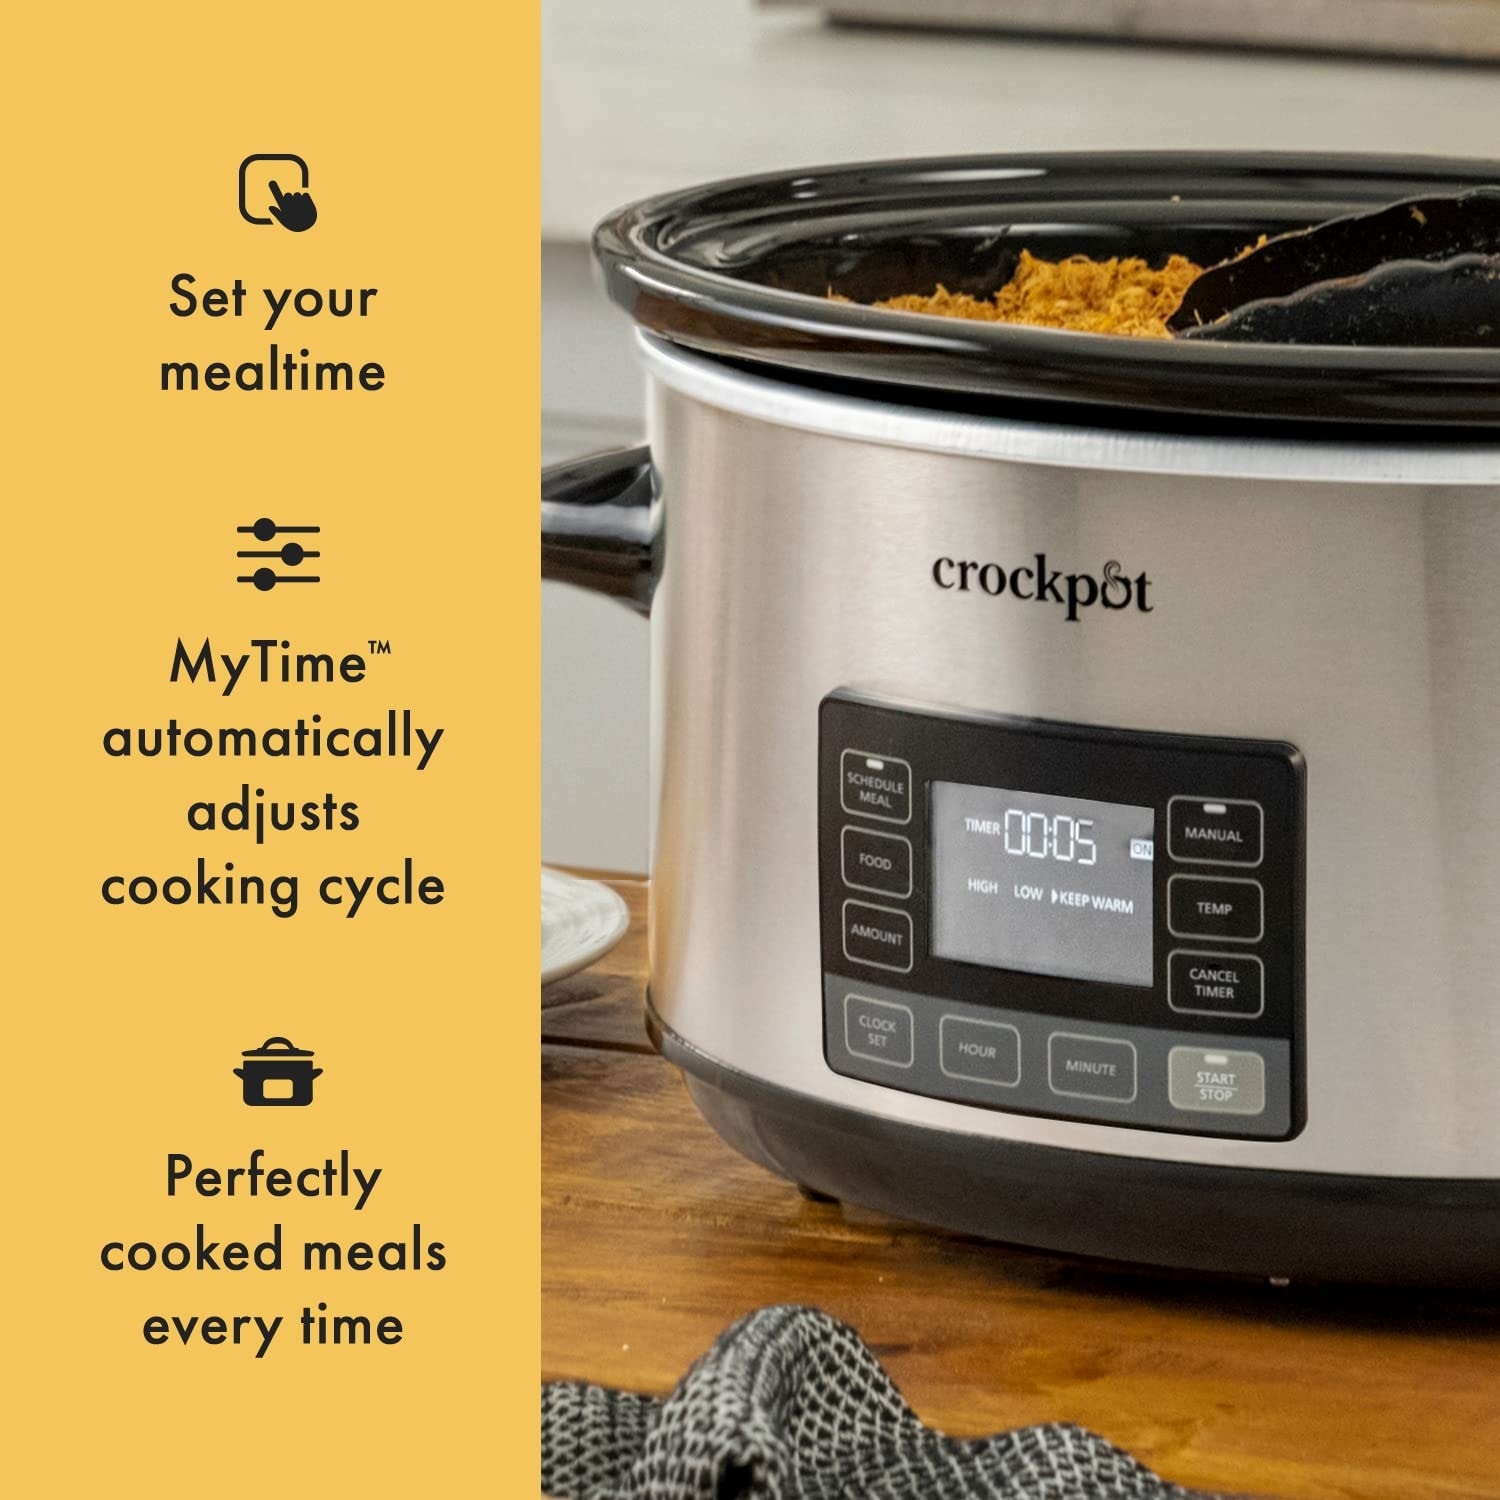 Crock-Pot Large 8 Quart Slow Cooker with Small Mini 16 Ounce Portable Food  Warmer, Kitchen Appliance Bundles, Stainless Steel